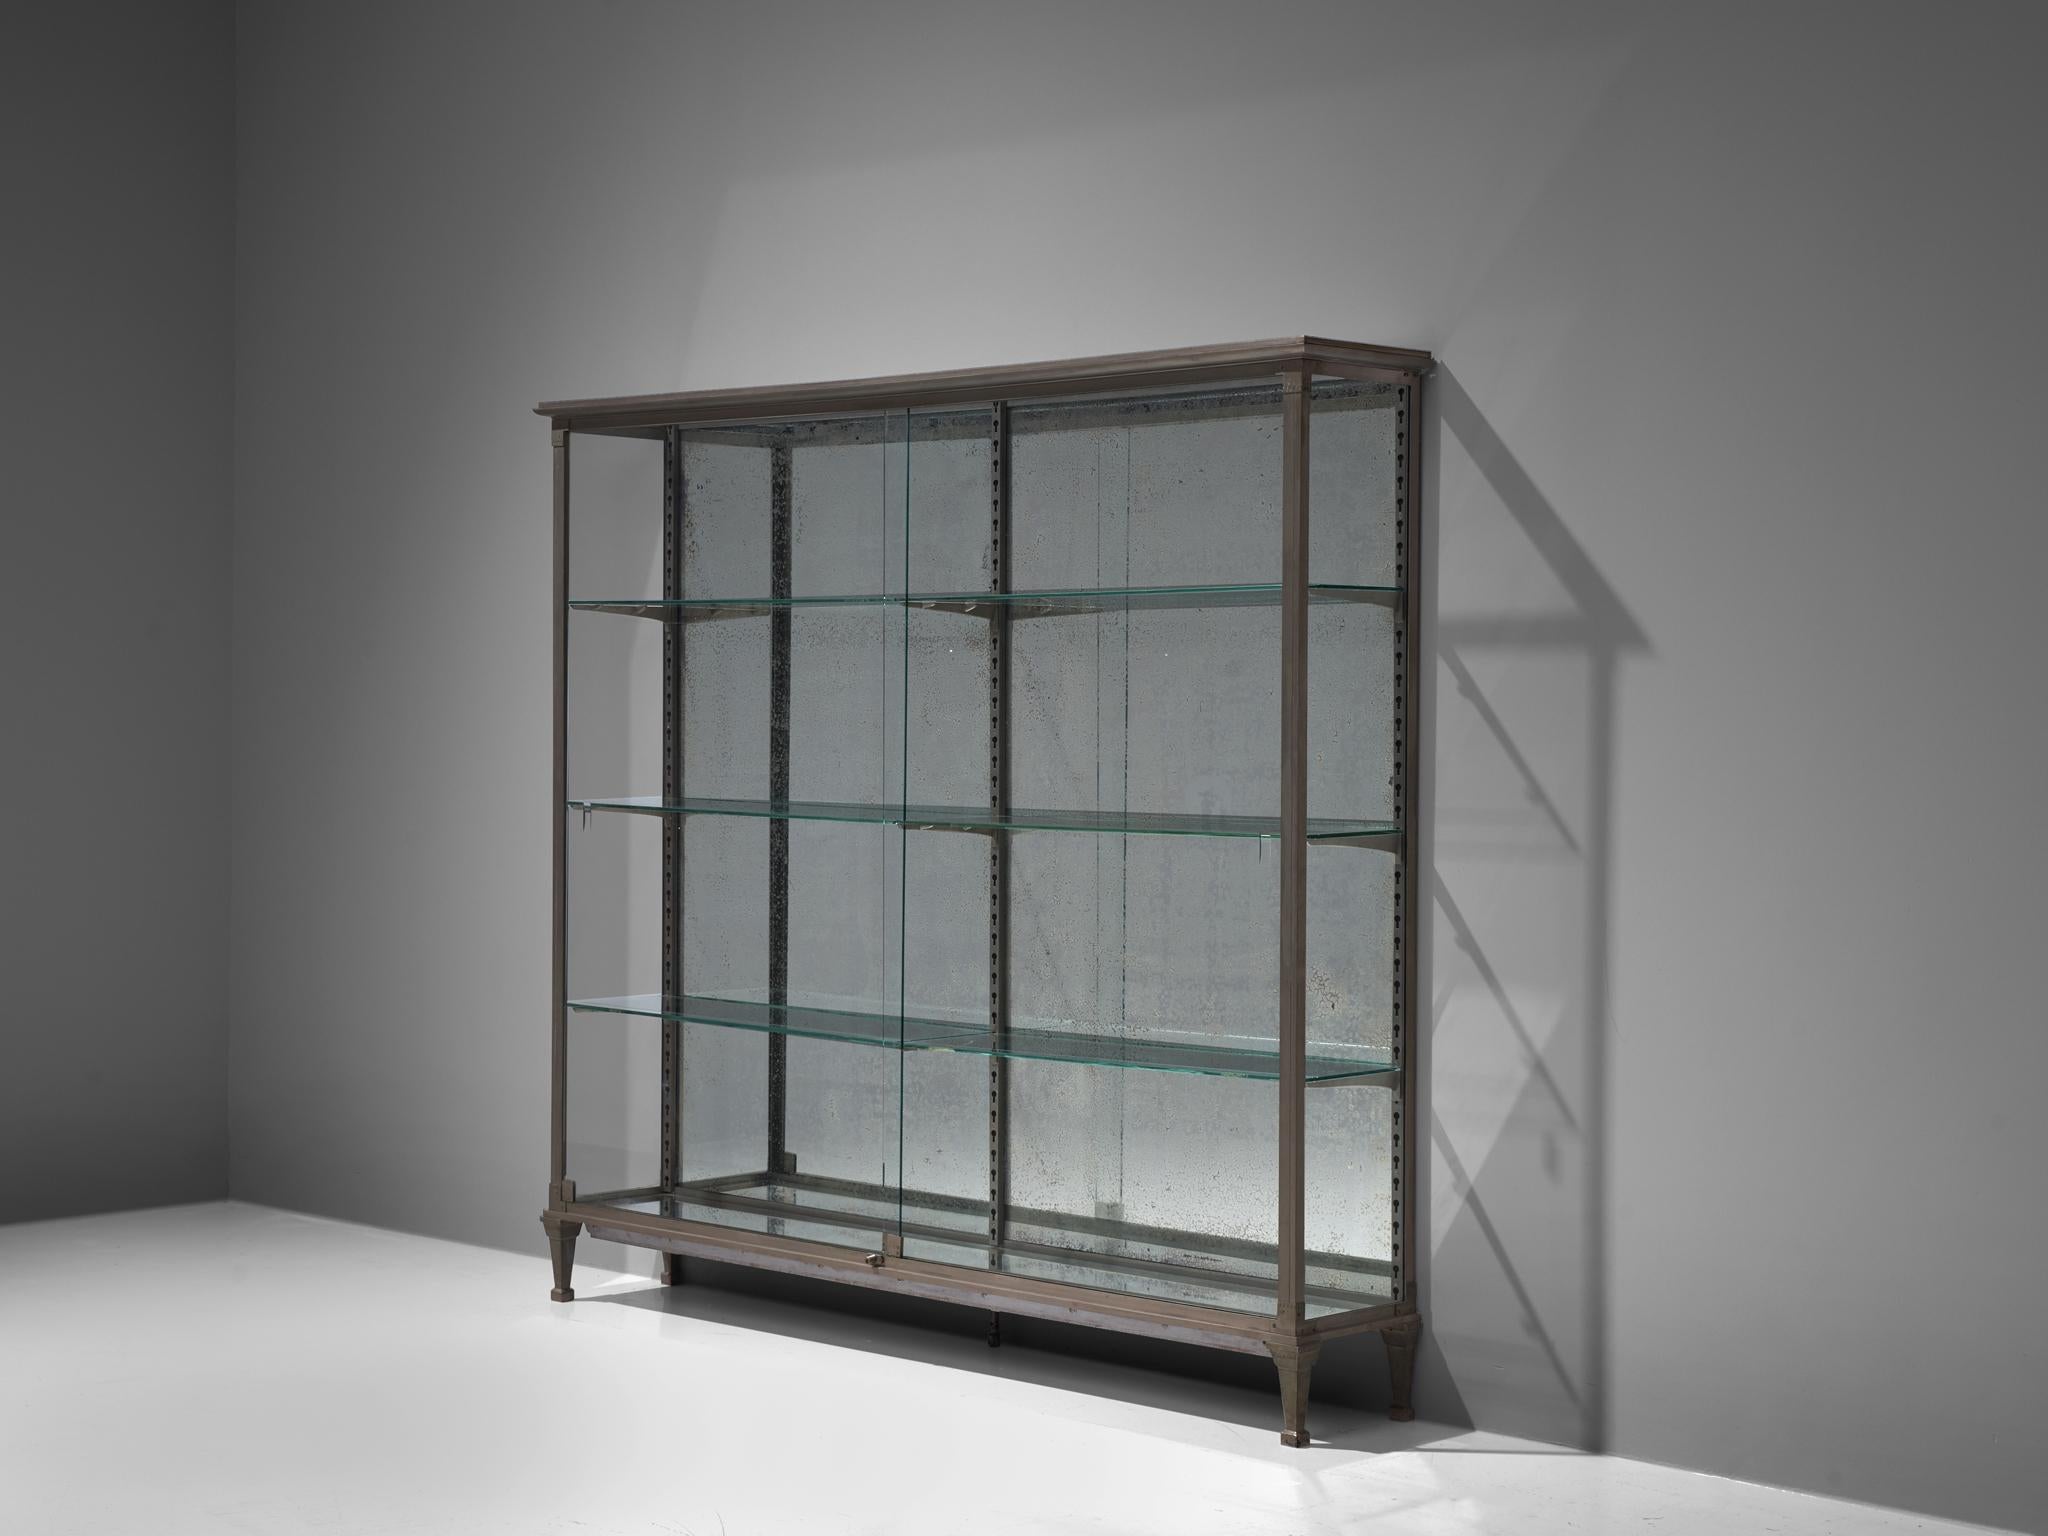 Large vitrine, glass, metal, mirrored glass, France, 1950s

Elegant glass vitrine with mirrored glass in the back and bottom which shows an admirable patina. Through the glass slidings doors in the front you have access to the interior. The glass